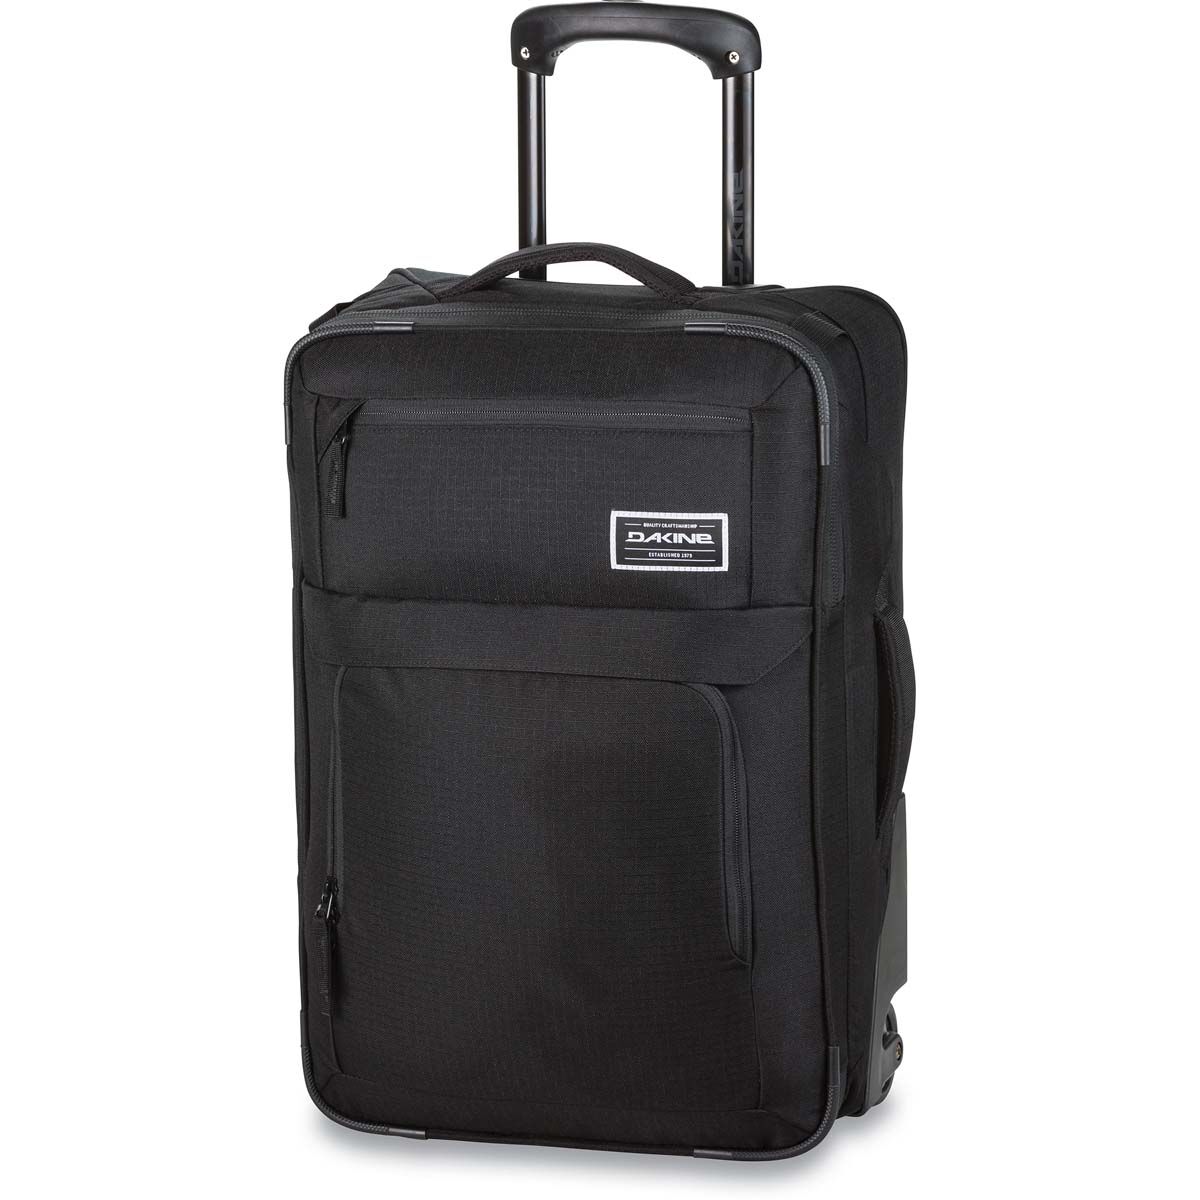 Dakine - Carry On Roller 40L - Luggage